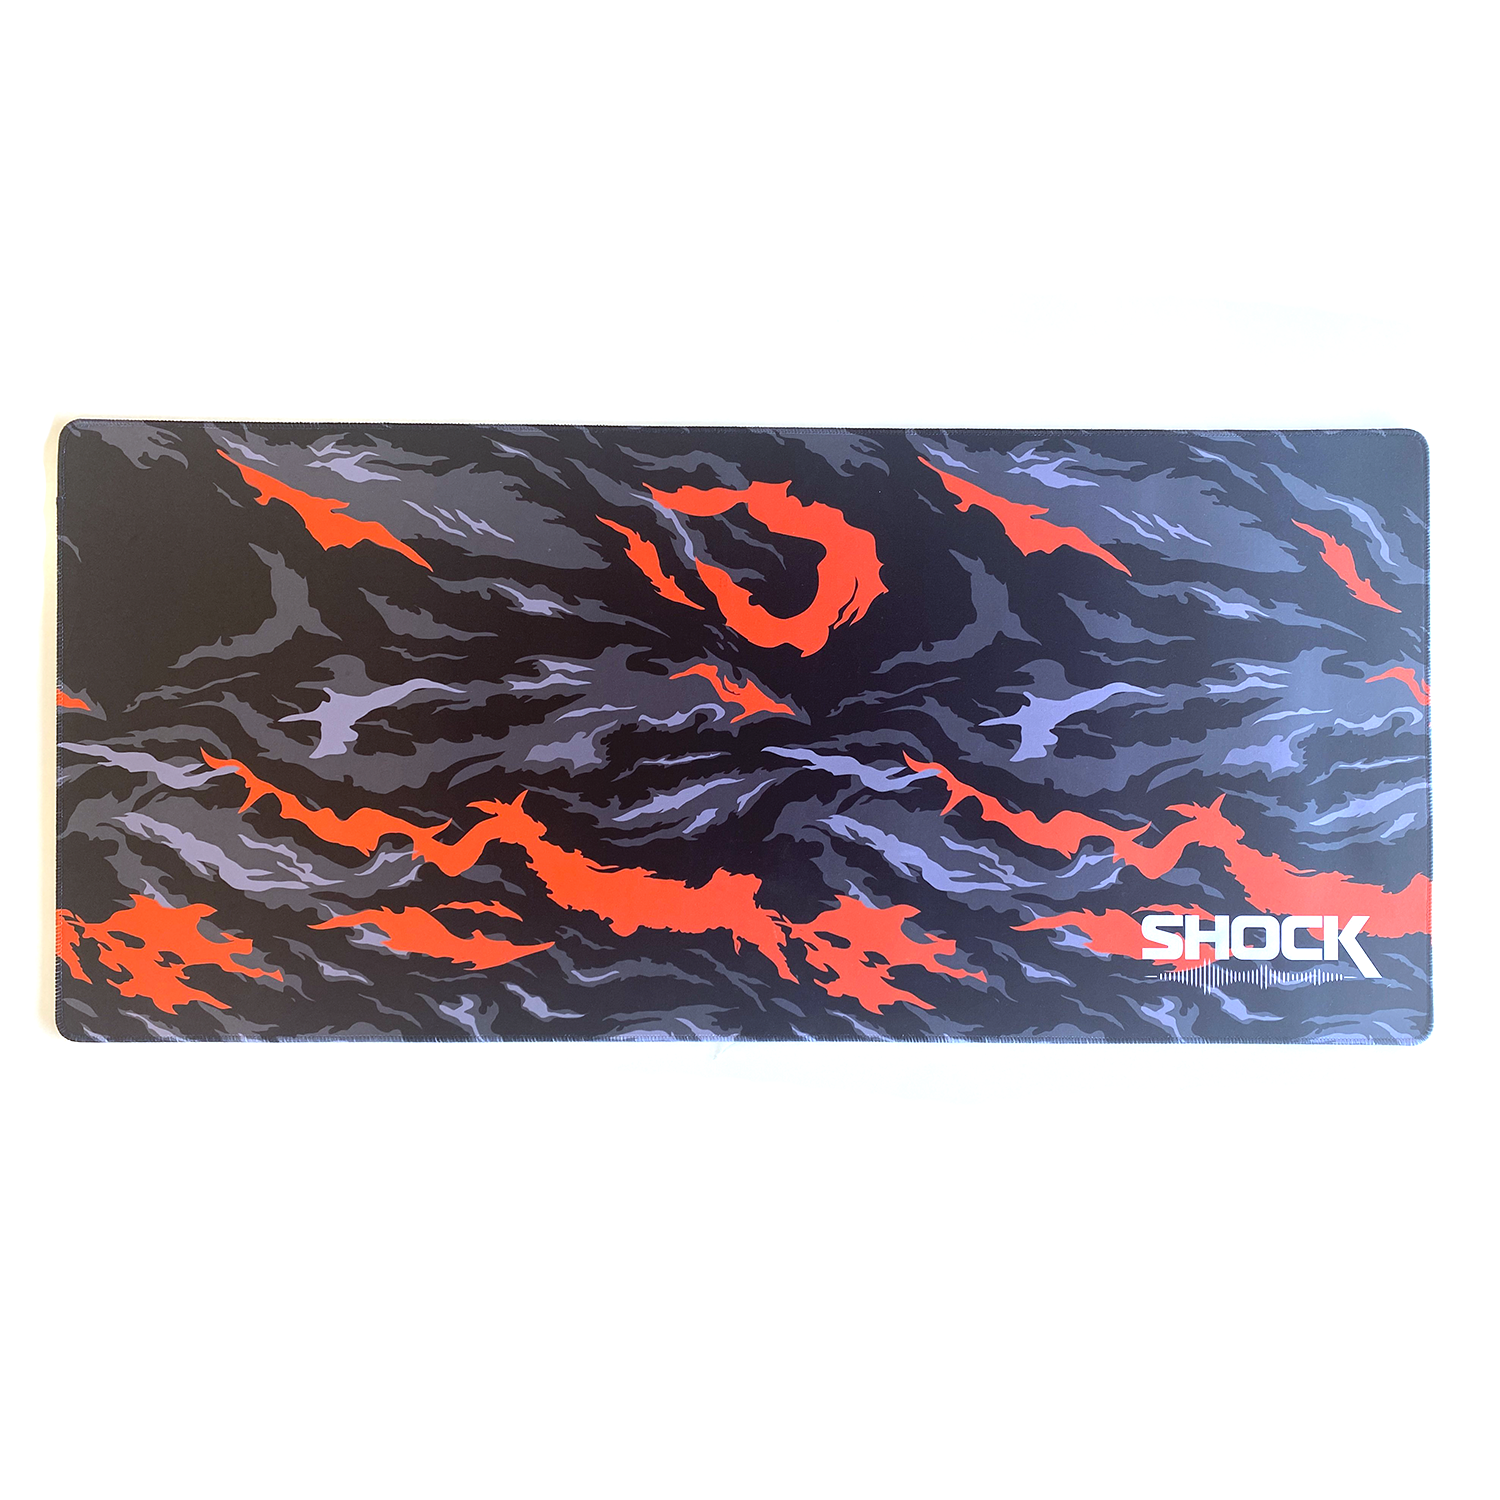 SF Shock 2023 Limited Edition Mousepad Pre-Order